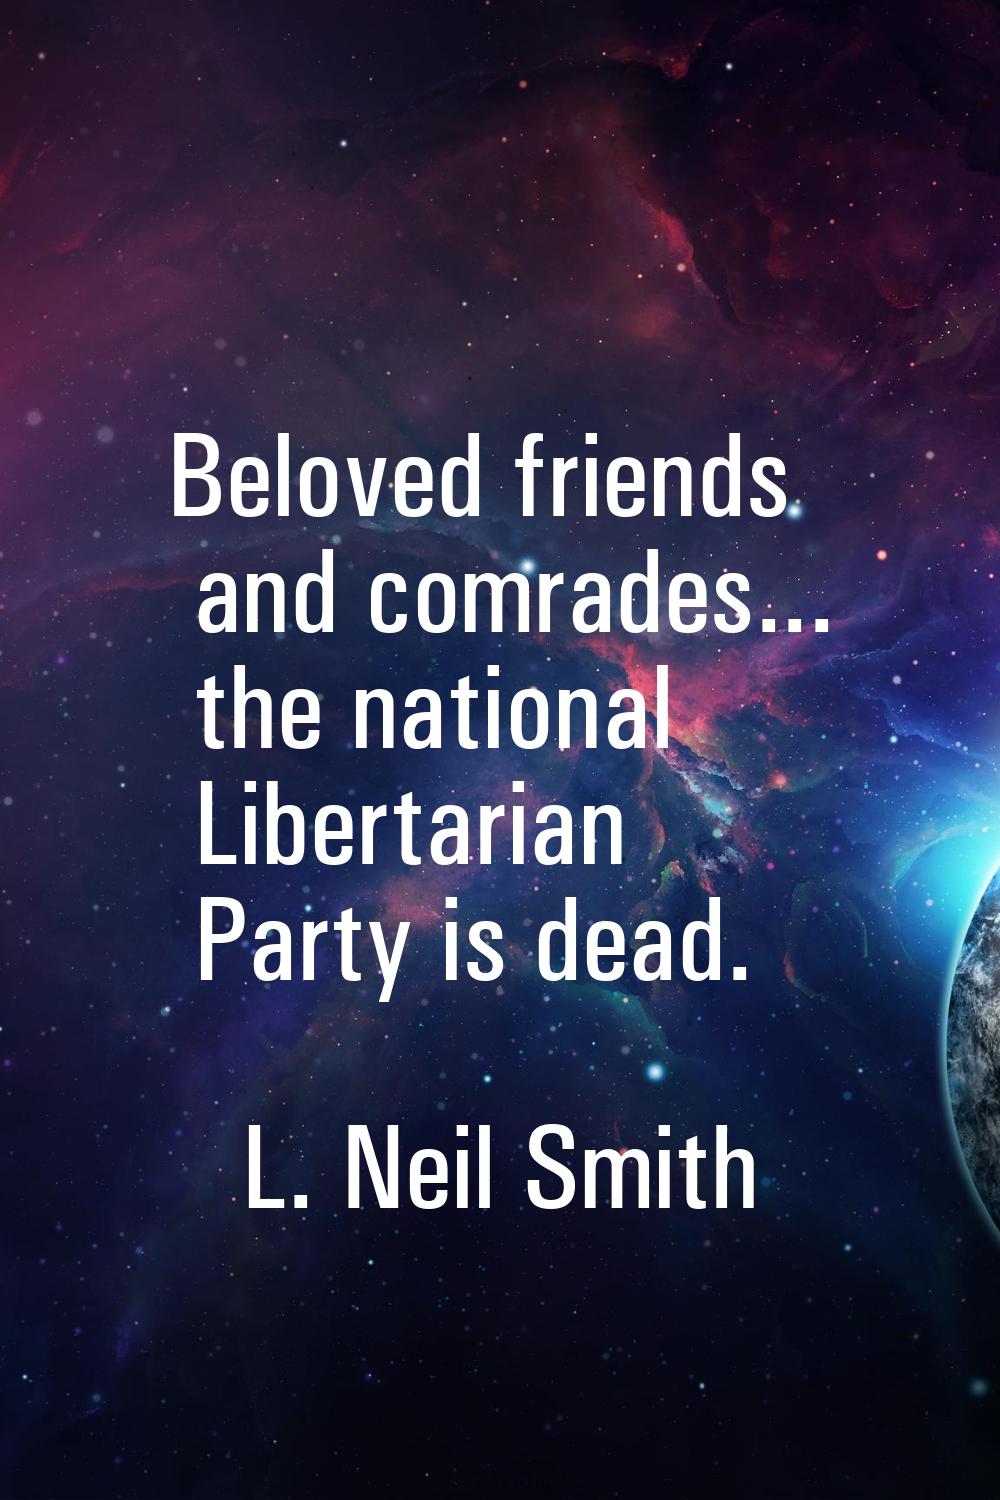 Beloved friends and comrades... the national Libertarian Party is dead.